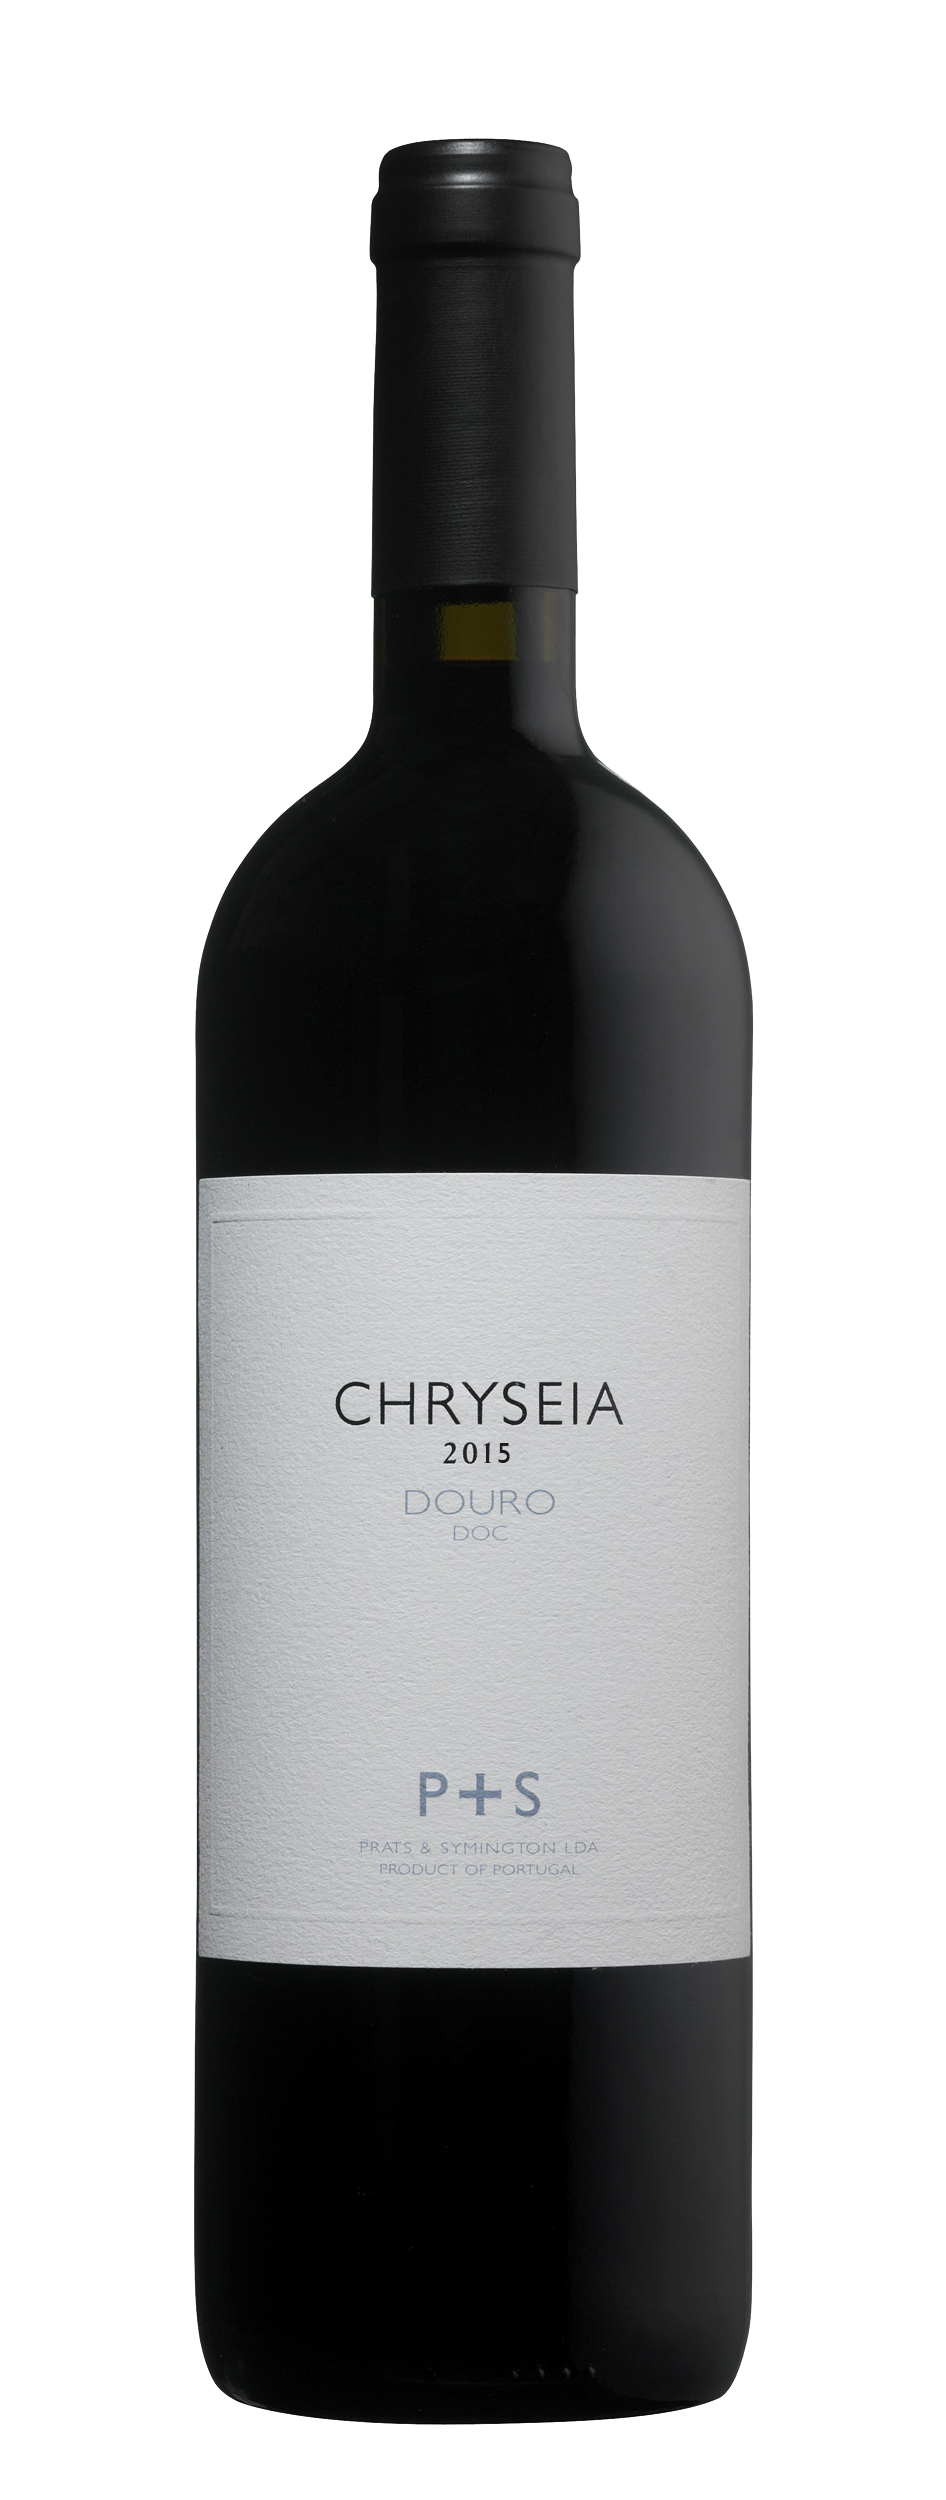 Product Image for P&S CHRYSEIA DOURO RED 2015 - MAGNUM (1.5L)